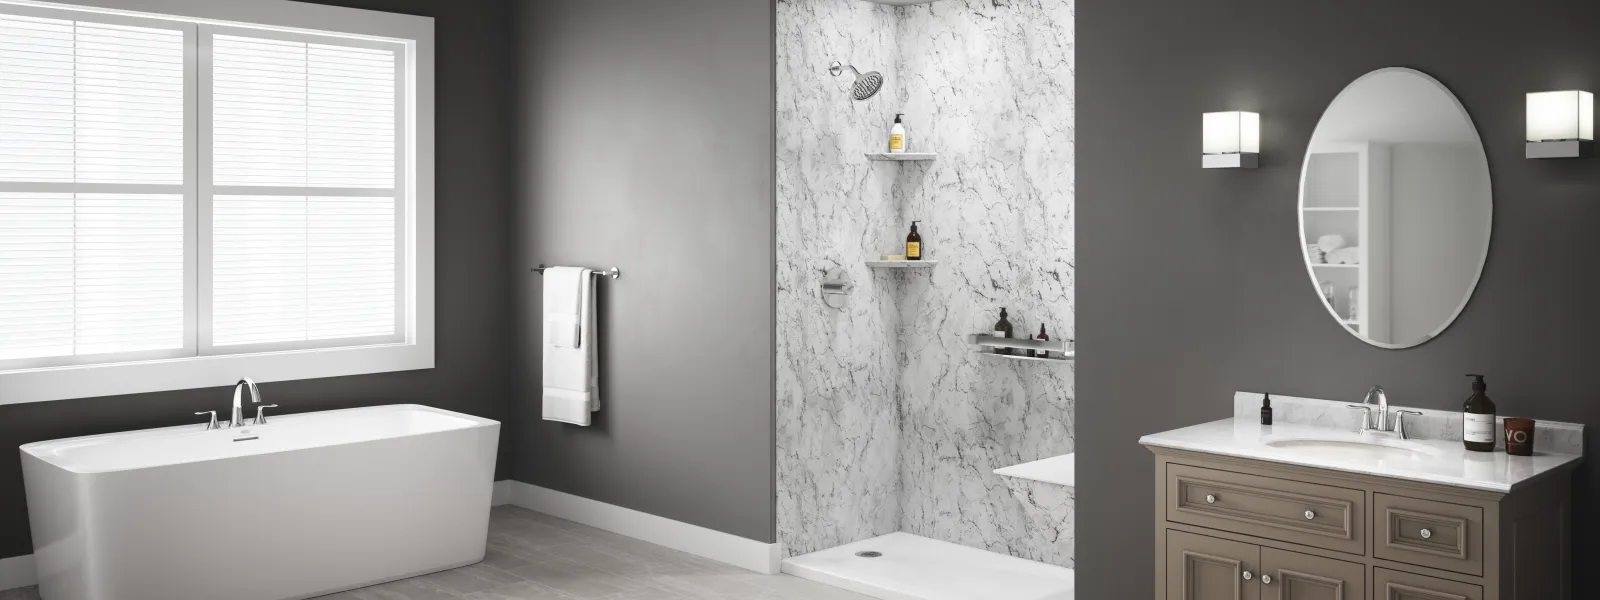 5 Design Trends for Your Bathroom in 2021